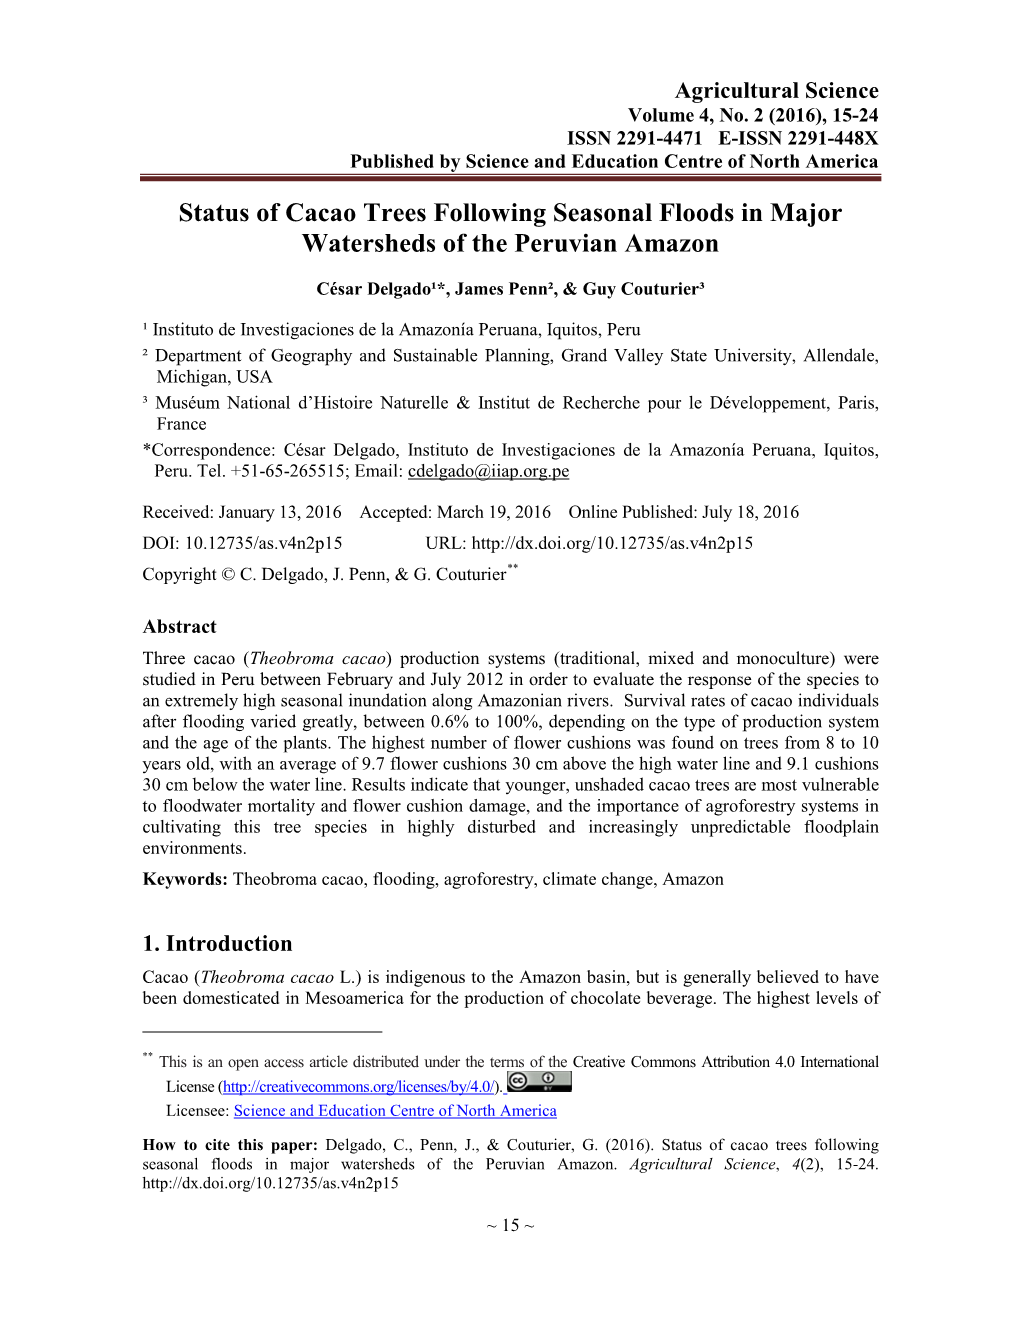 Status of Cacao Trees Following Seasonal Floods in Major Watersheds of the Peruvian Amazon